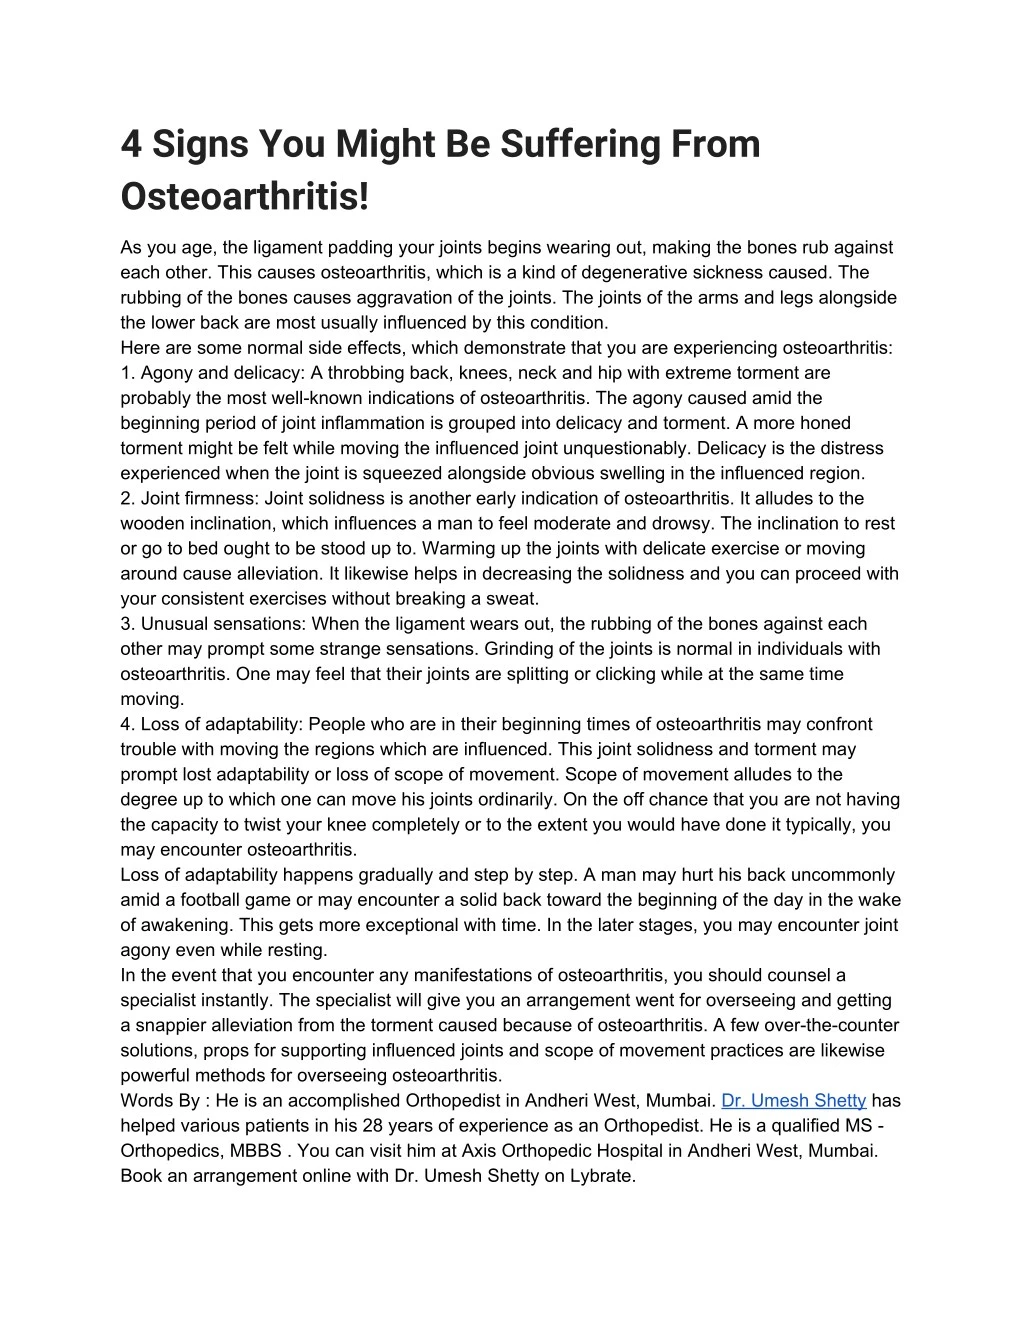 4 signs you might be suffering from osteoarthritis